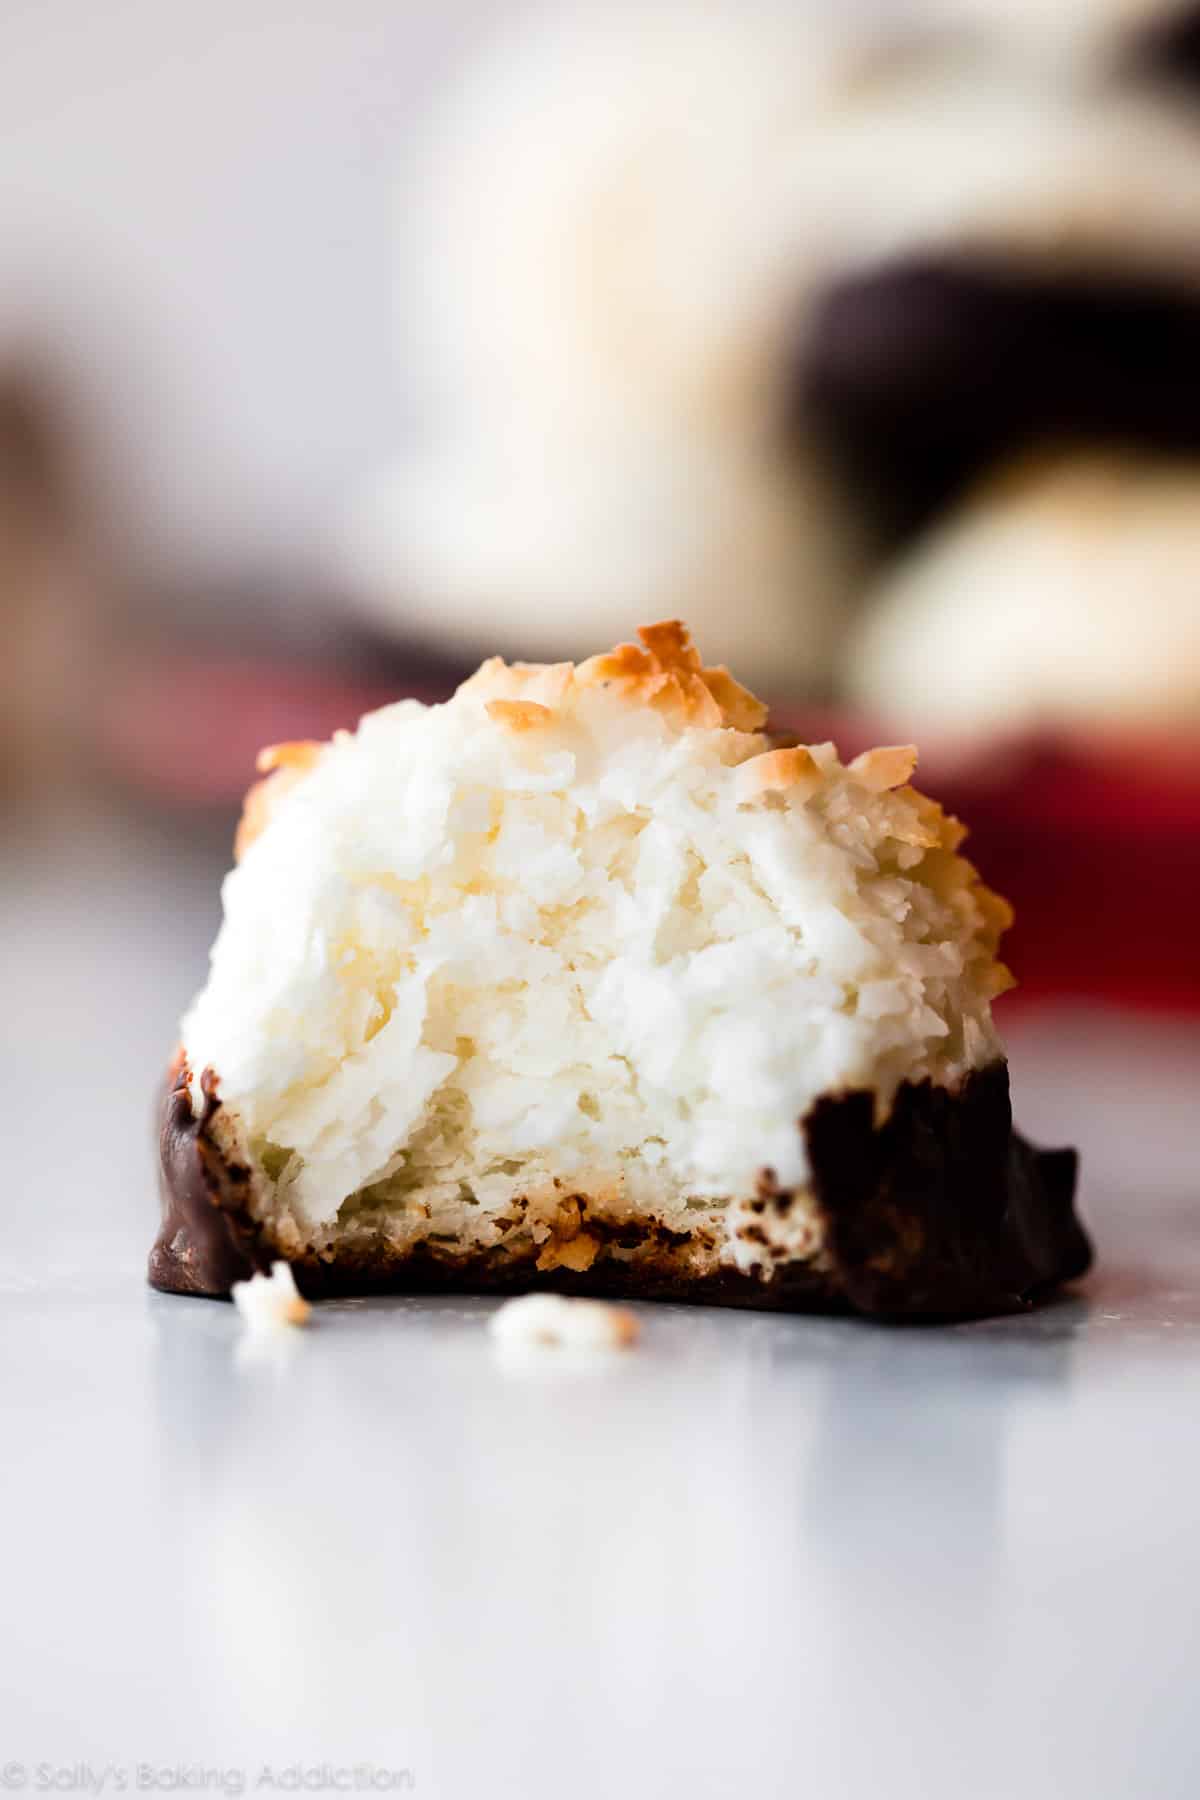 Coconut macaroon dipped in chocolate